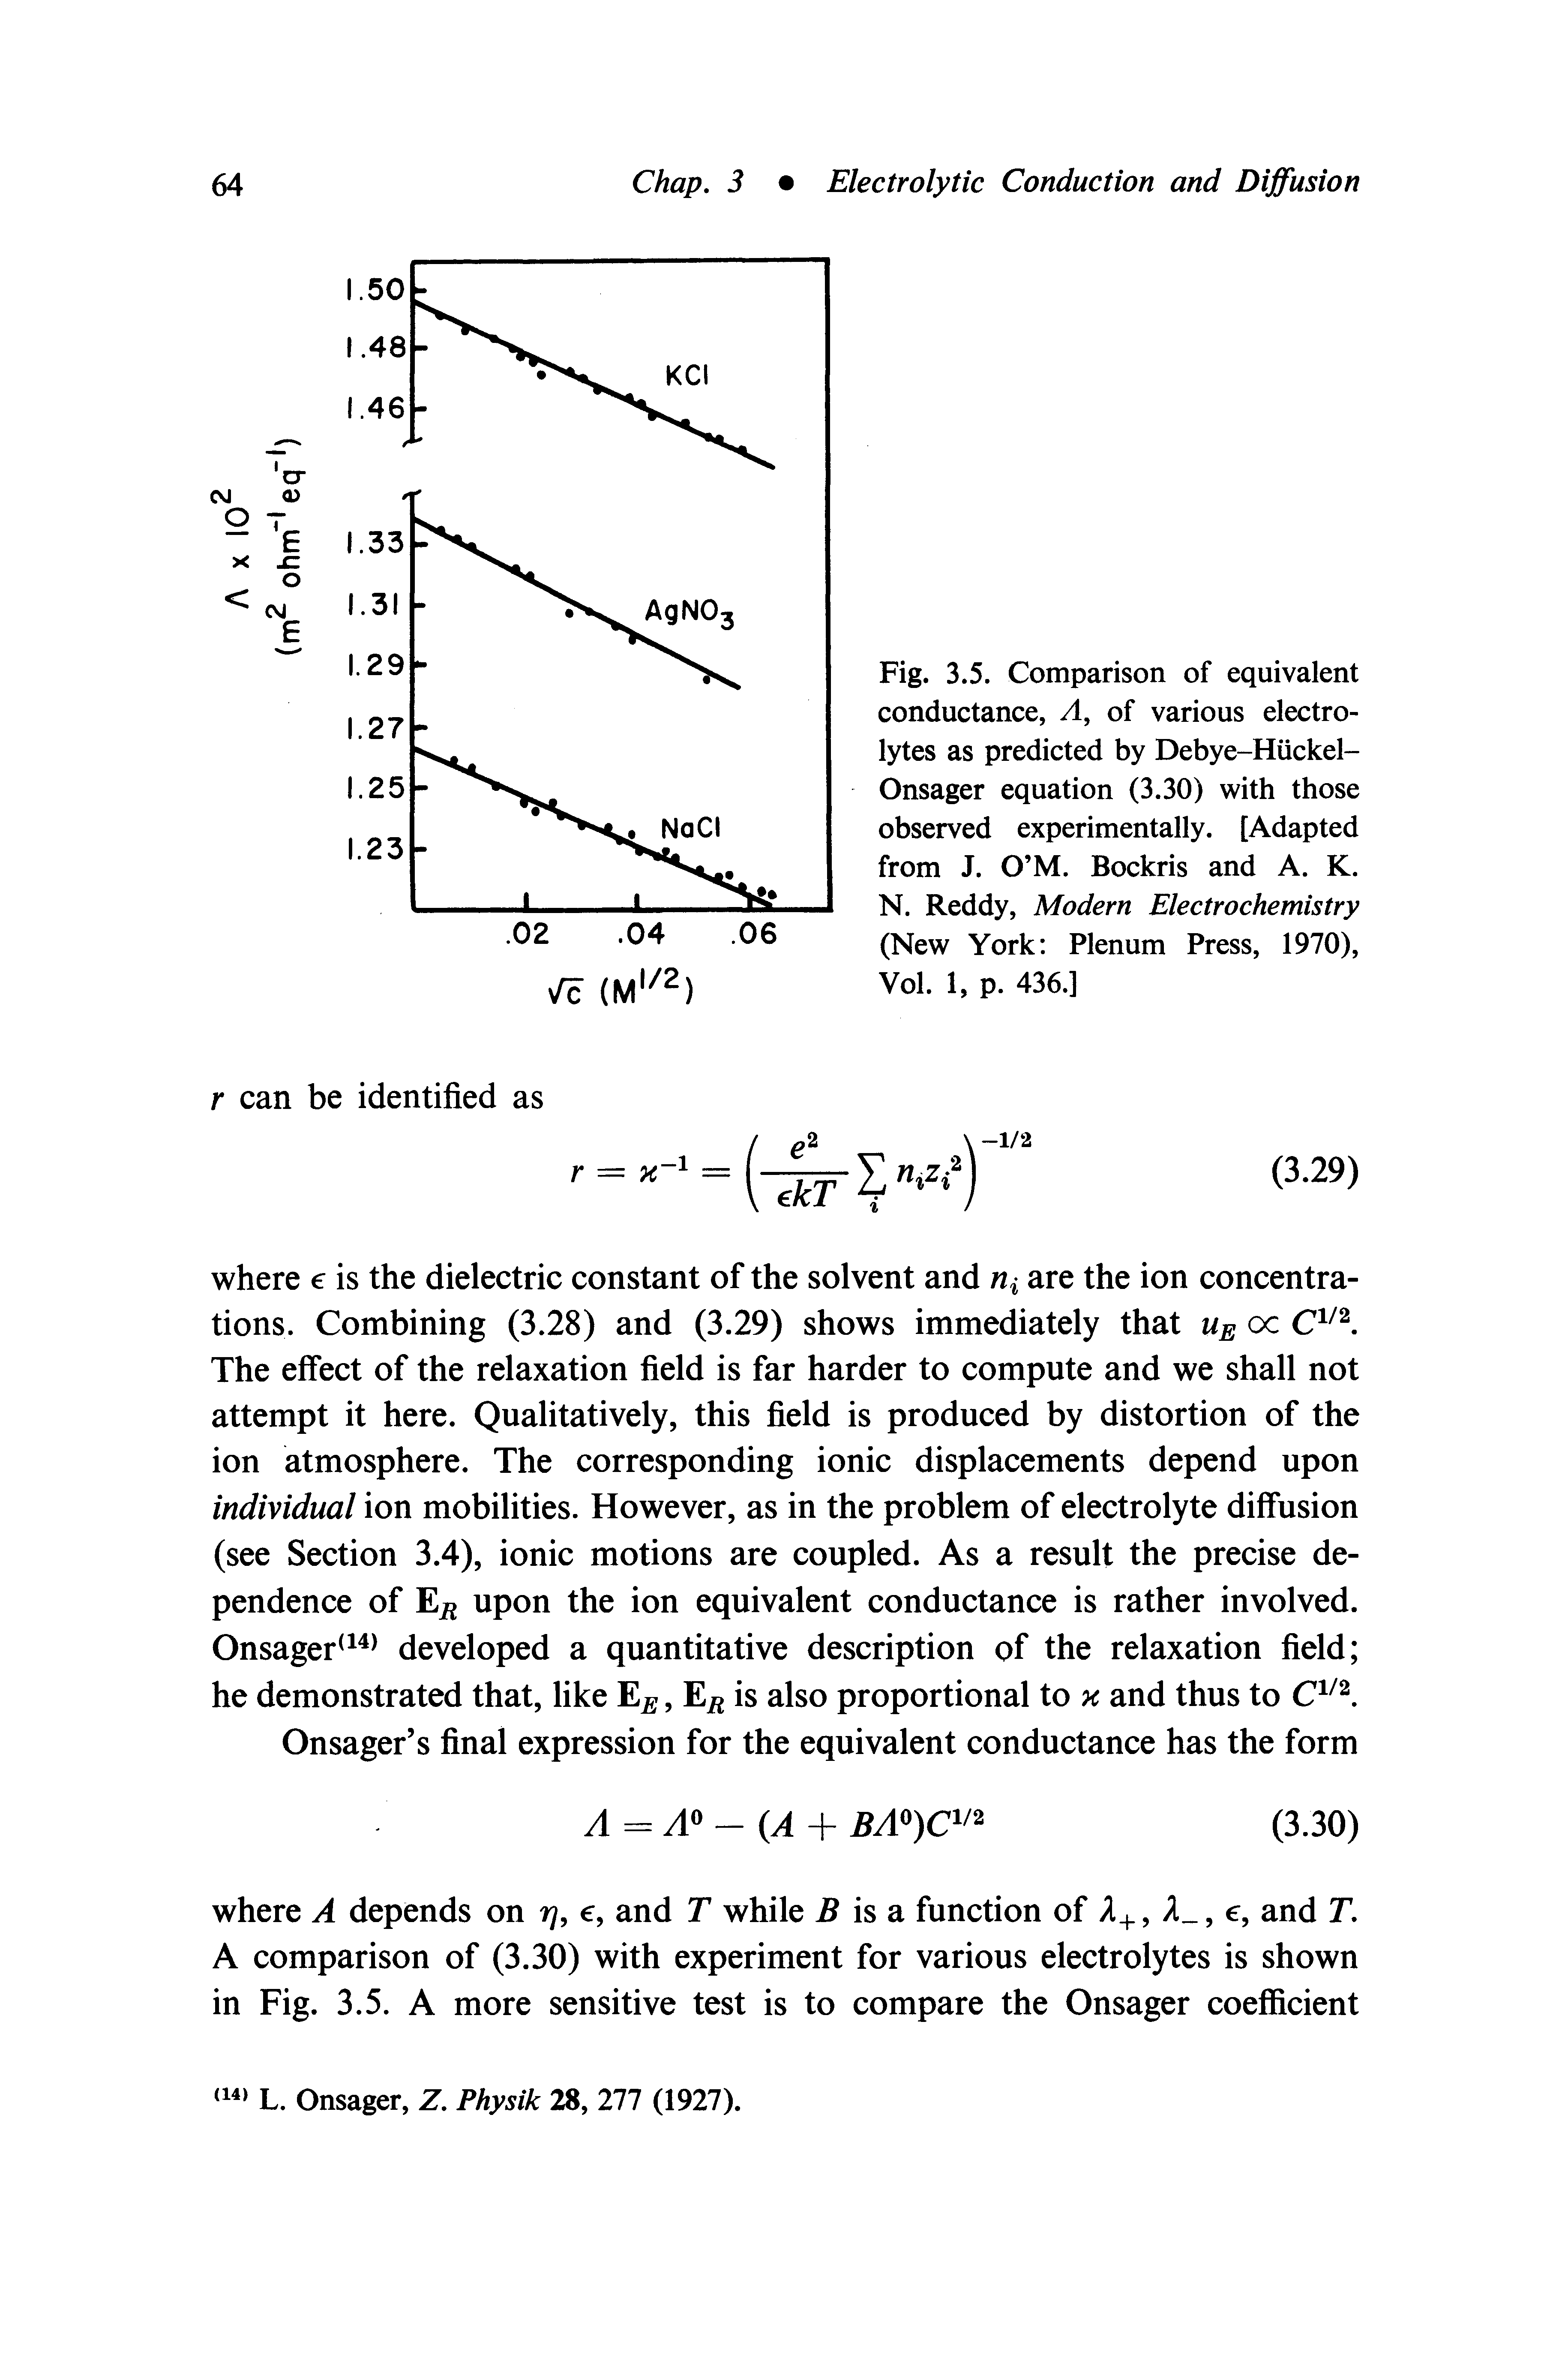 Fig. 3.5. Comparison of equivalent conductance. A, of various electrolytes as predicted by Debye-Huckel-Onsager equation (3.30) with those observed experimentally. [Adapted from J. O M. Bockris and A. K. N. Reddy, Modern Electrochemistry (New York Plenum Press, 1970), Vol. 1, p. 436.]...